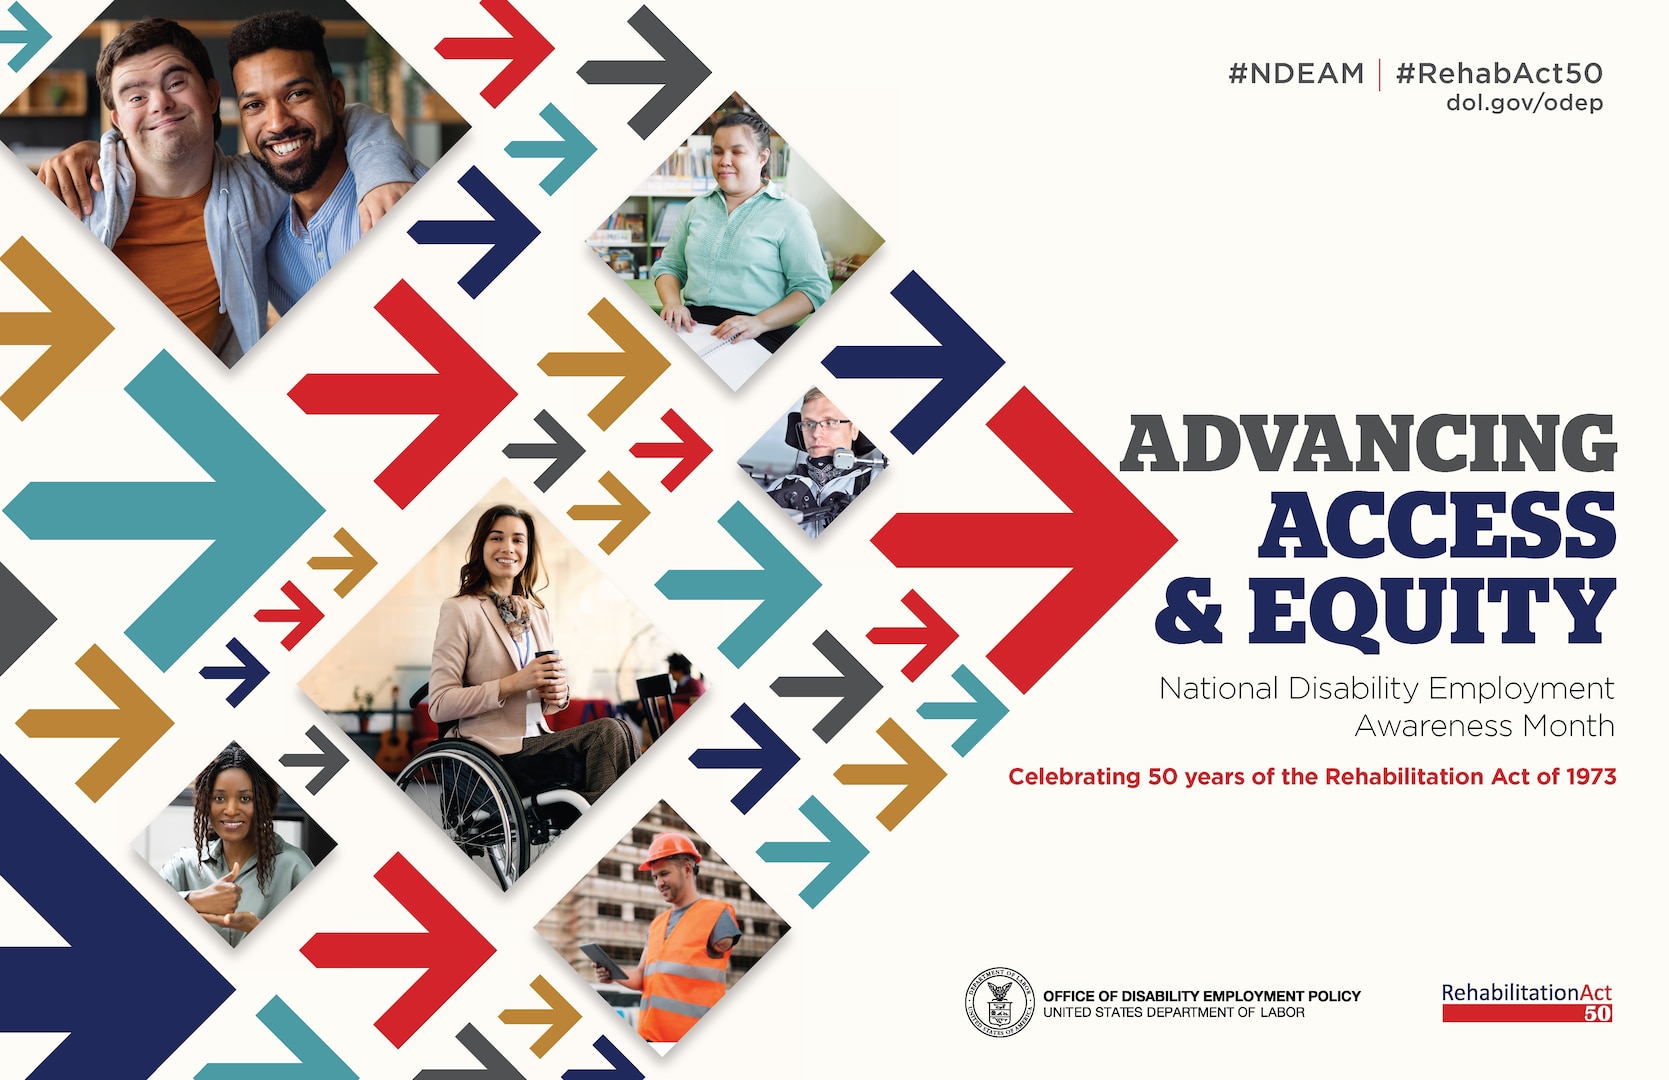 The poster is rectangular in shape with
a white background. The words, “Advancing Access & Equity, National Disability Employment Awareness Month, Celebrating 50 years of the Rehabilitation Act of 1973” are placed to the right of a field of red, gray, teal, blue and yellow arrows. Mixed within the arrows are diverse images of people with disabilities in workplace settings. Along the top in small gray letters are the hashtags “NDEAM” and “RehabAct50” followed by the website address, dol.gov/ODEP. In the lower right corner is the DOL seal followed by the words “Office of Disability Employment Policy, United States Department of Labor” as well as the Rehabilitation Act 50 logo.